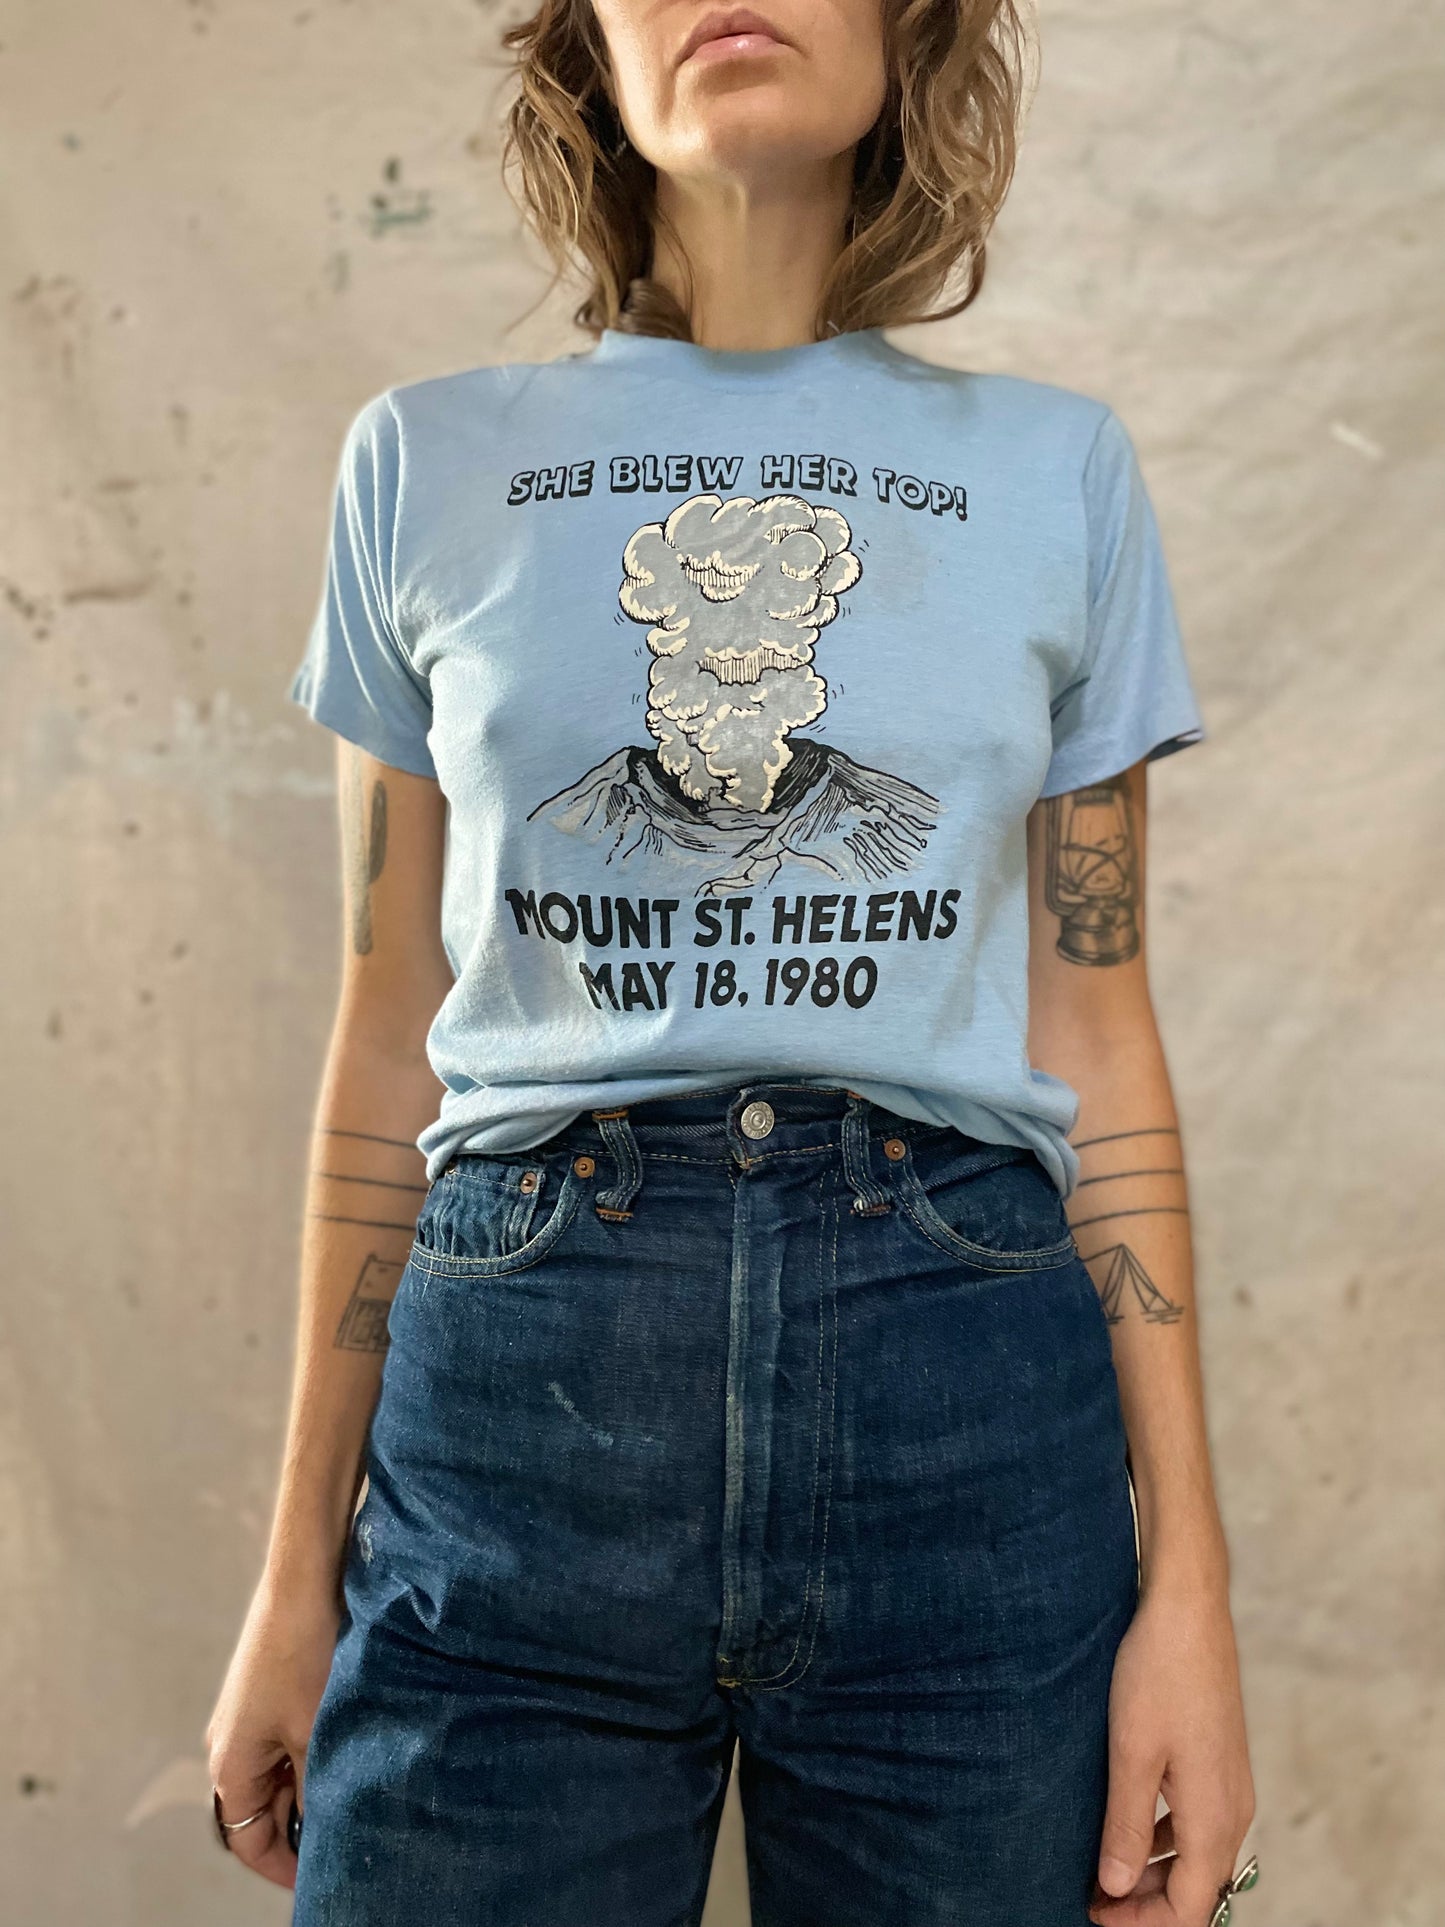 80s Mt. St. Helens “She Blew Her Top” Tee